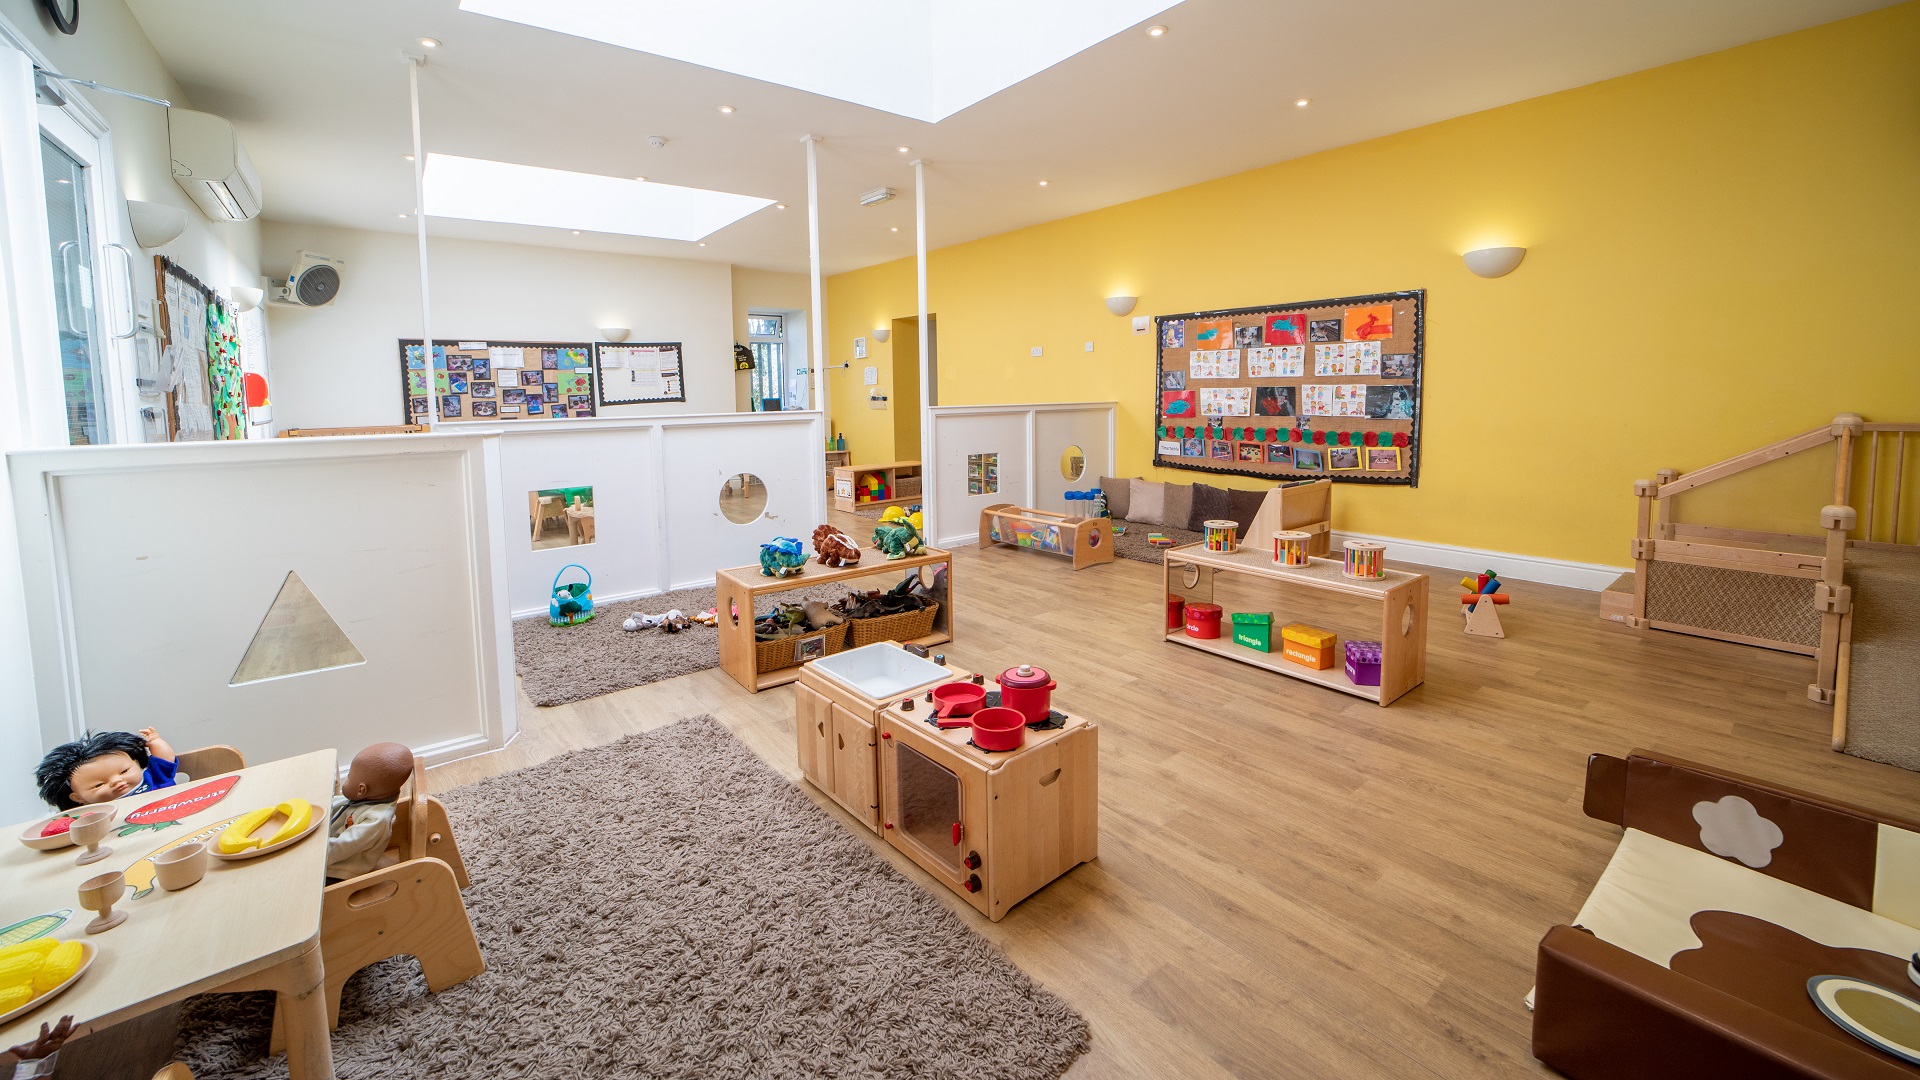 New Southgate Nursery images Baby Room